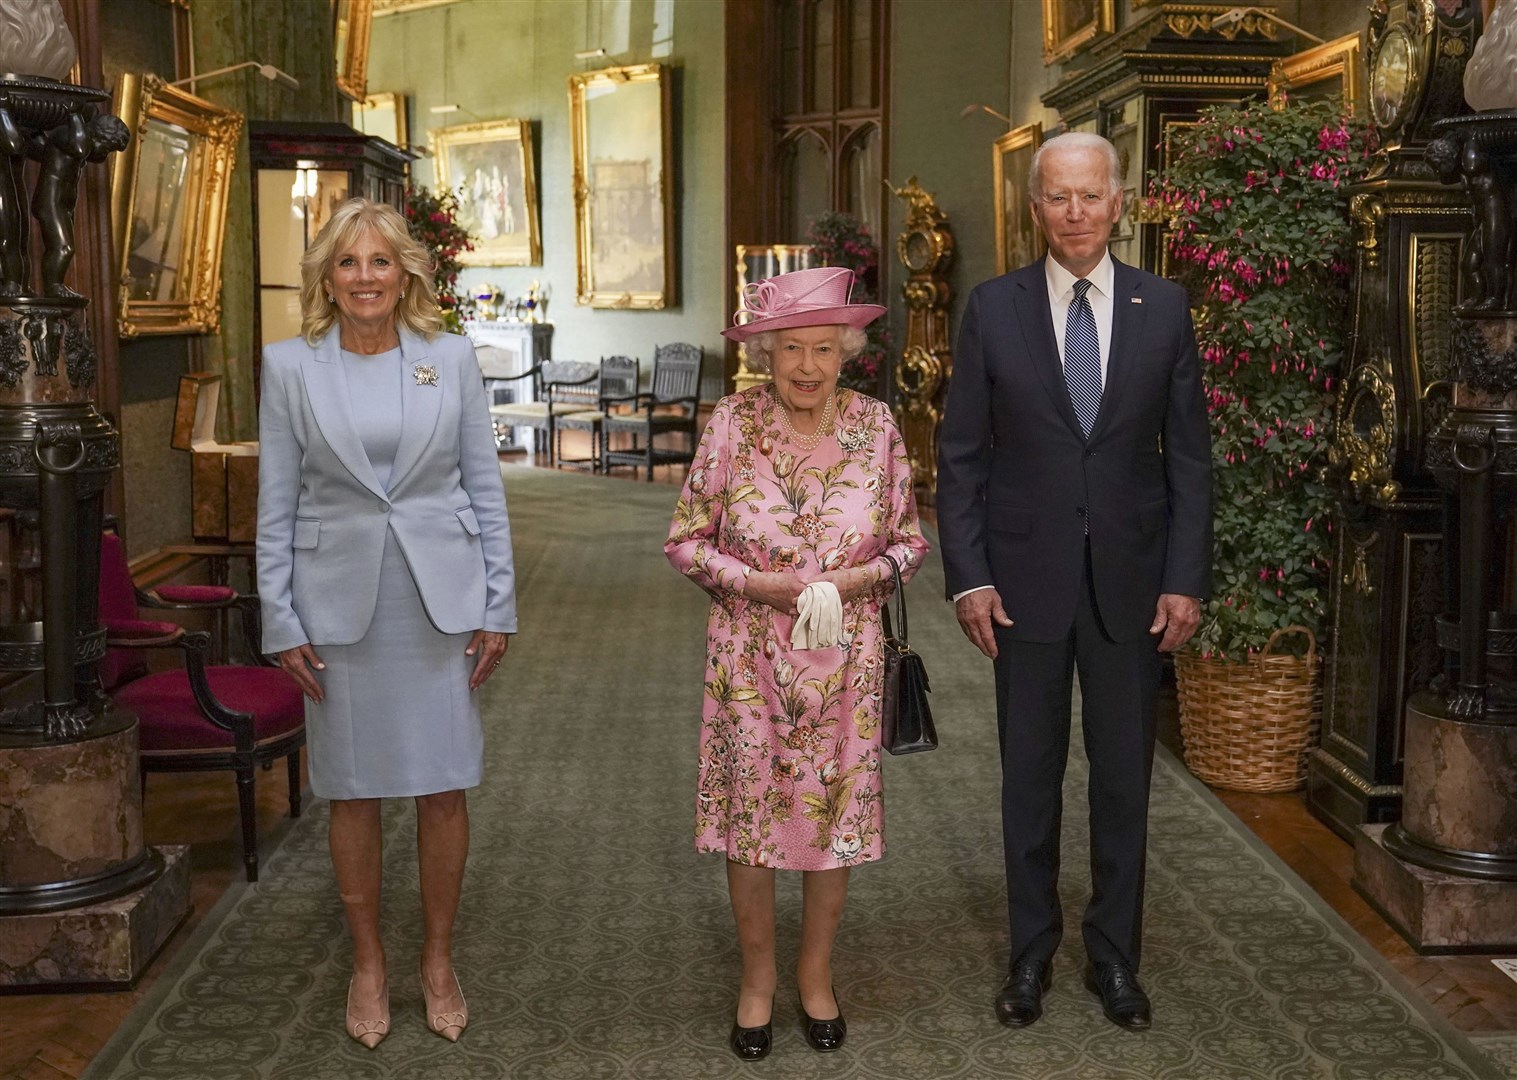 President Joe Biden, pictured with First Lady Jill Biden, has paid tribute to the Queen (Steve Parsons/PA)